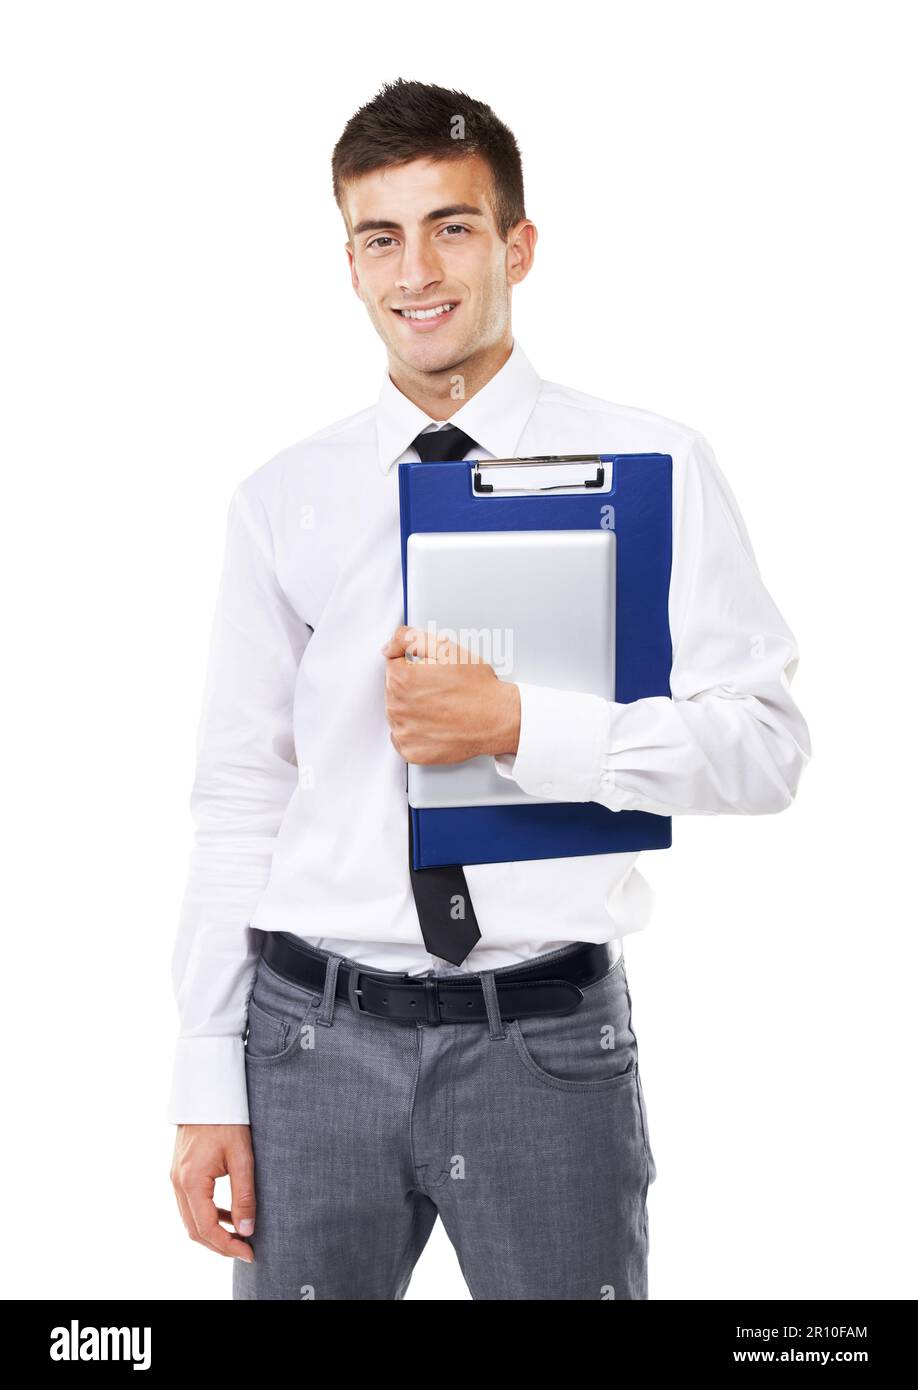 Ready to inspect. Portrait of a smiling man holding a clipboard. Stock Photo